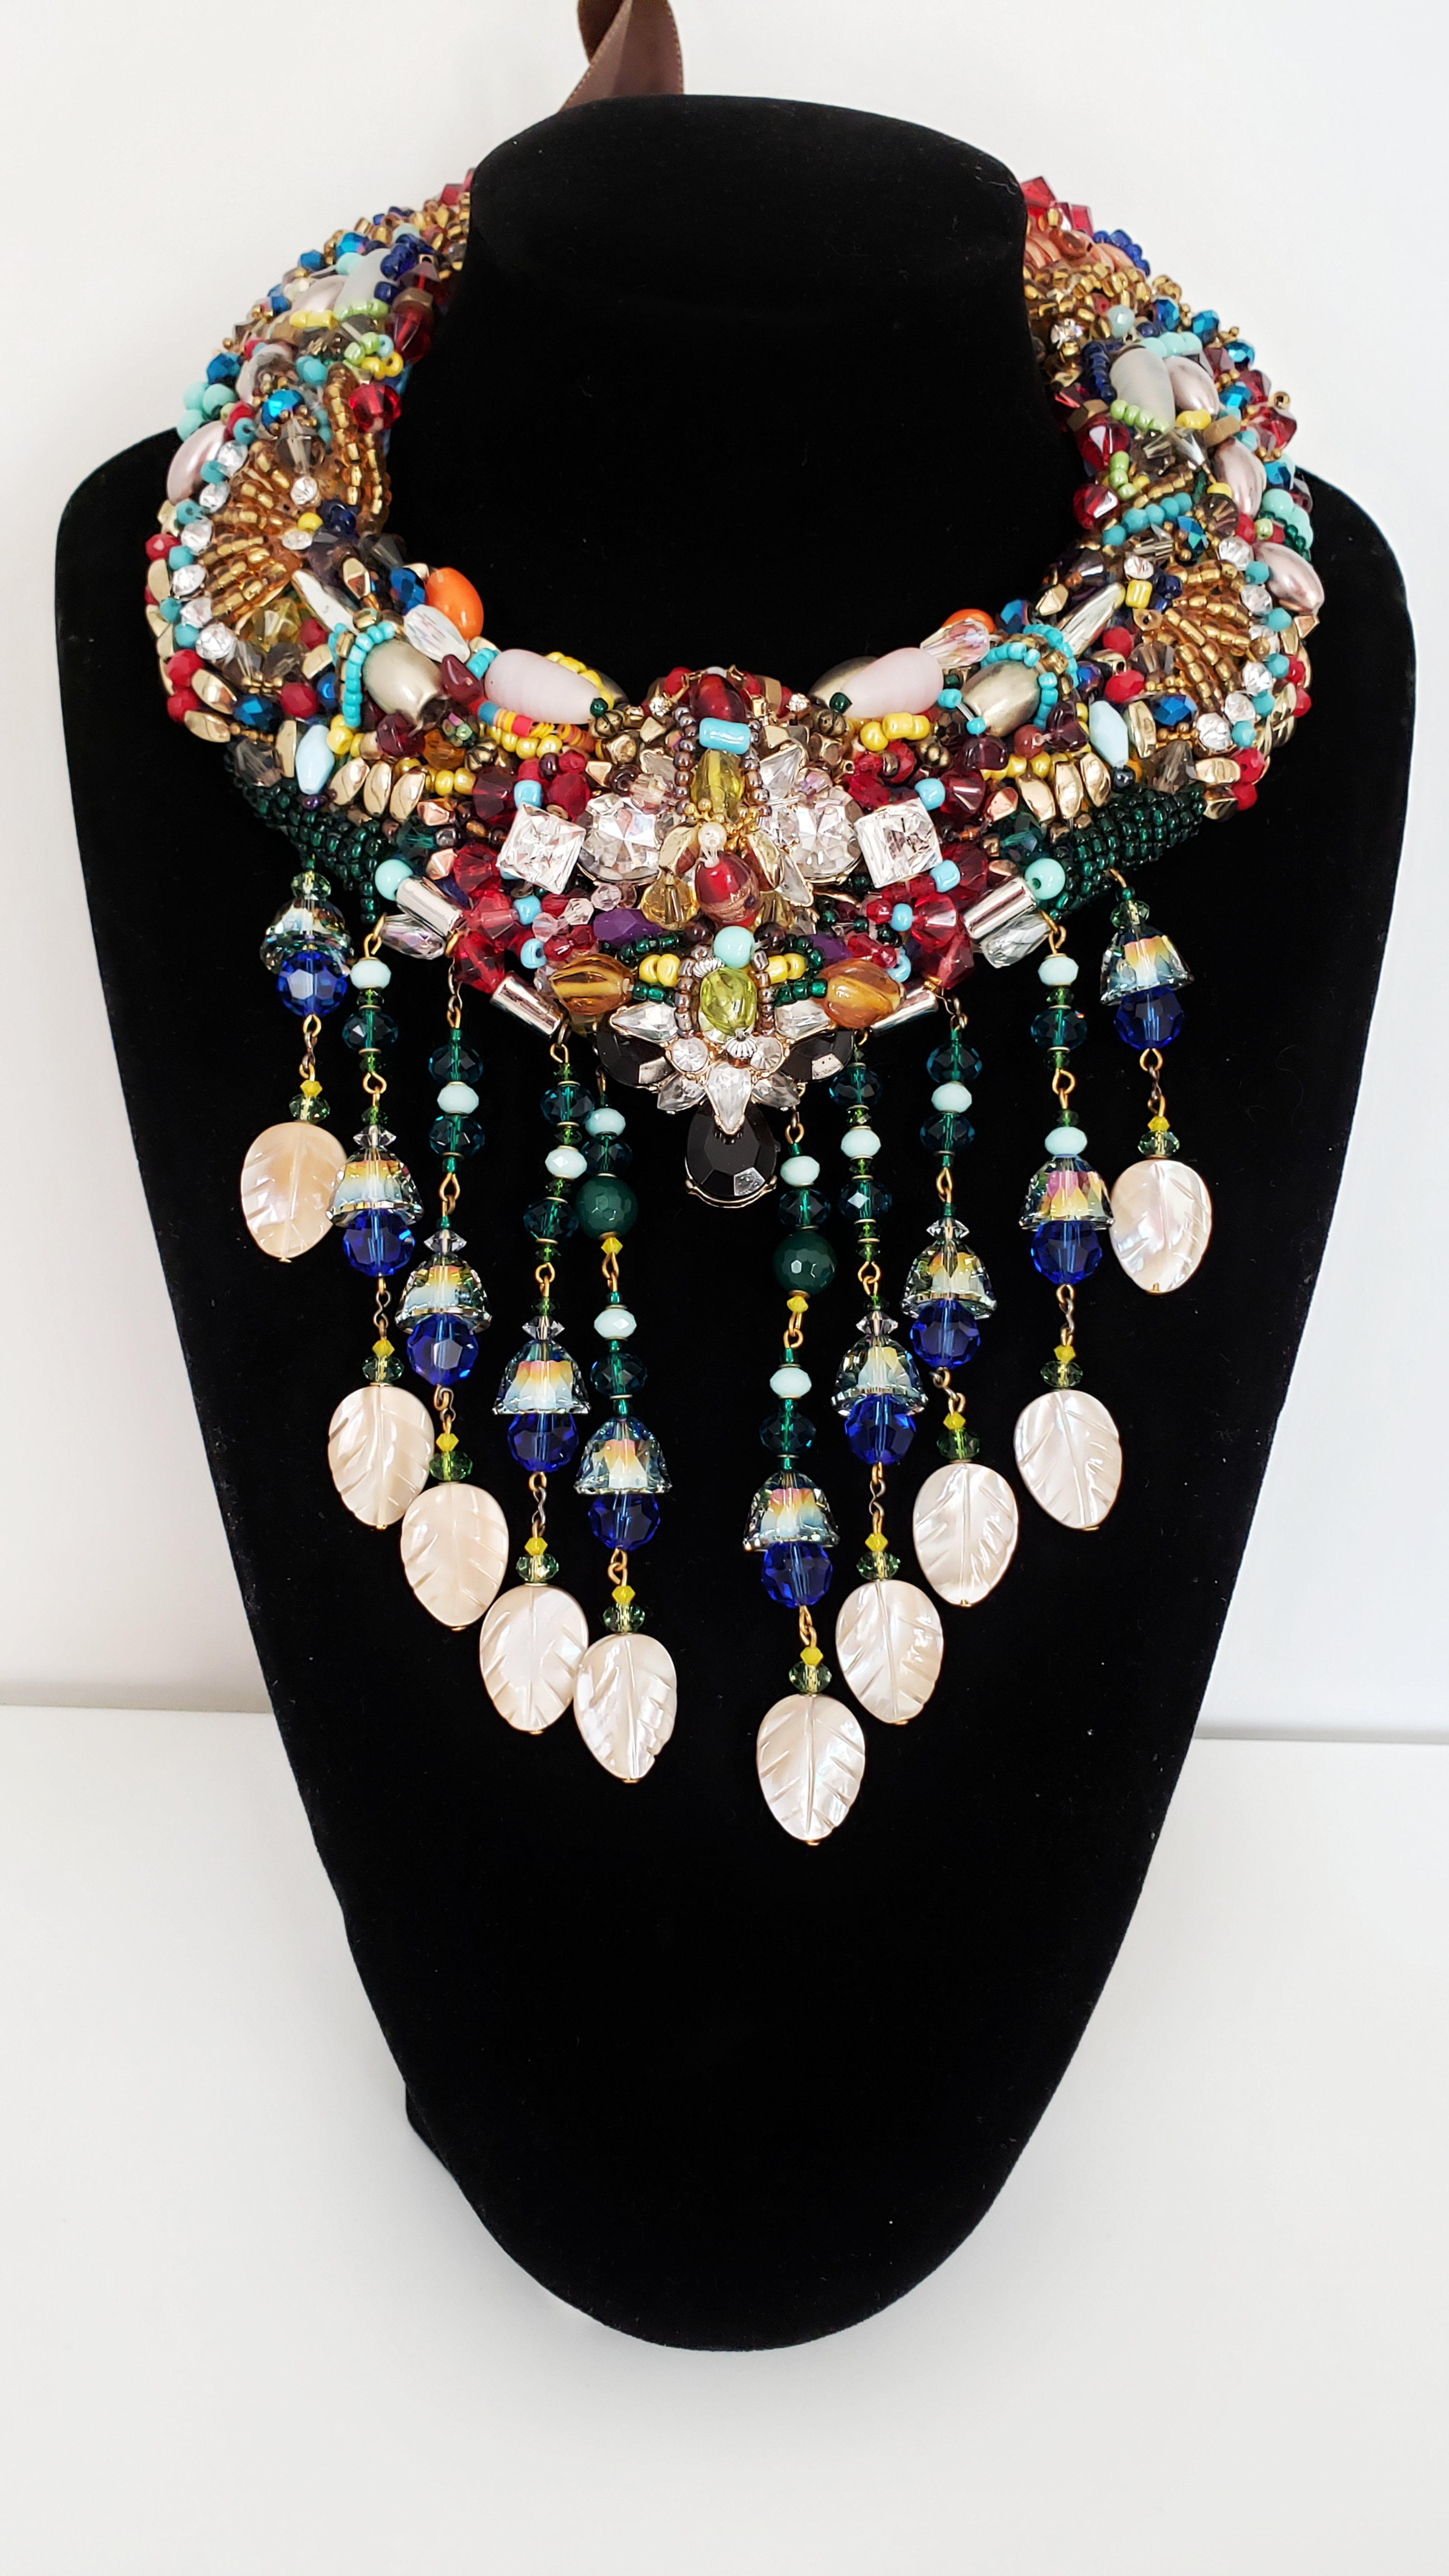 This superbly stylish multi-beaded Swarovski embellished mother-of-pearl tassel drop statement necklace boasts tonnes of vibrancy, colour combination and detailing.

This necklace features a striking combination of assorted glass beads, acrylic